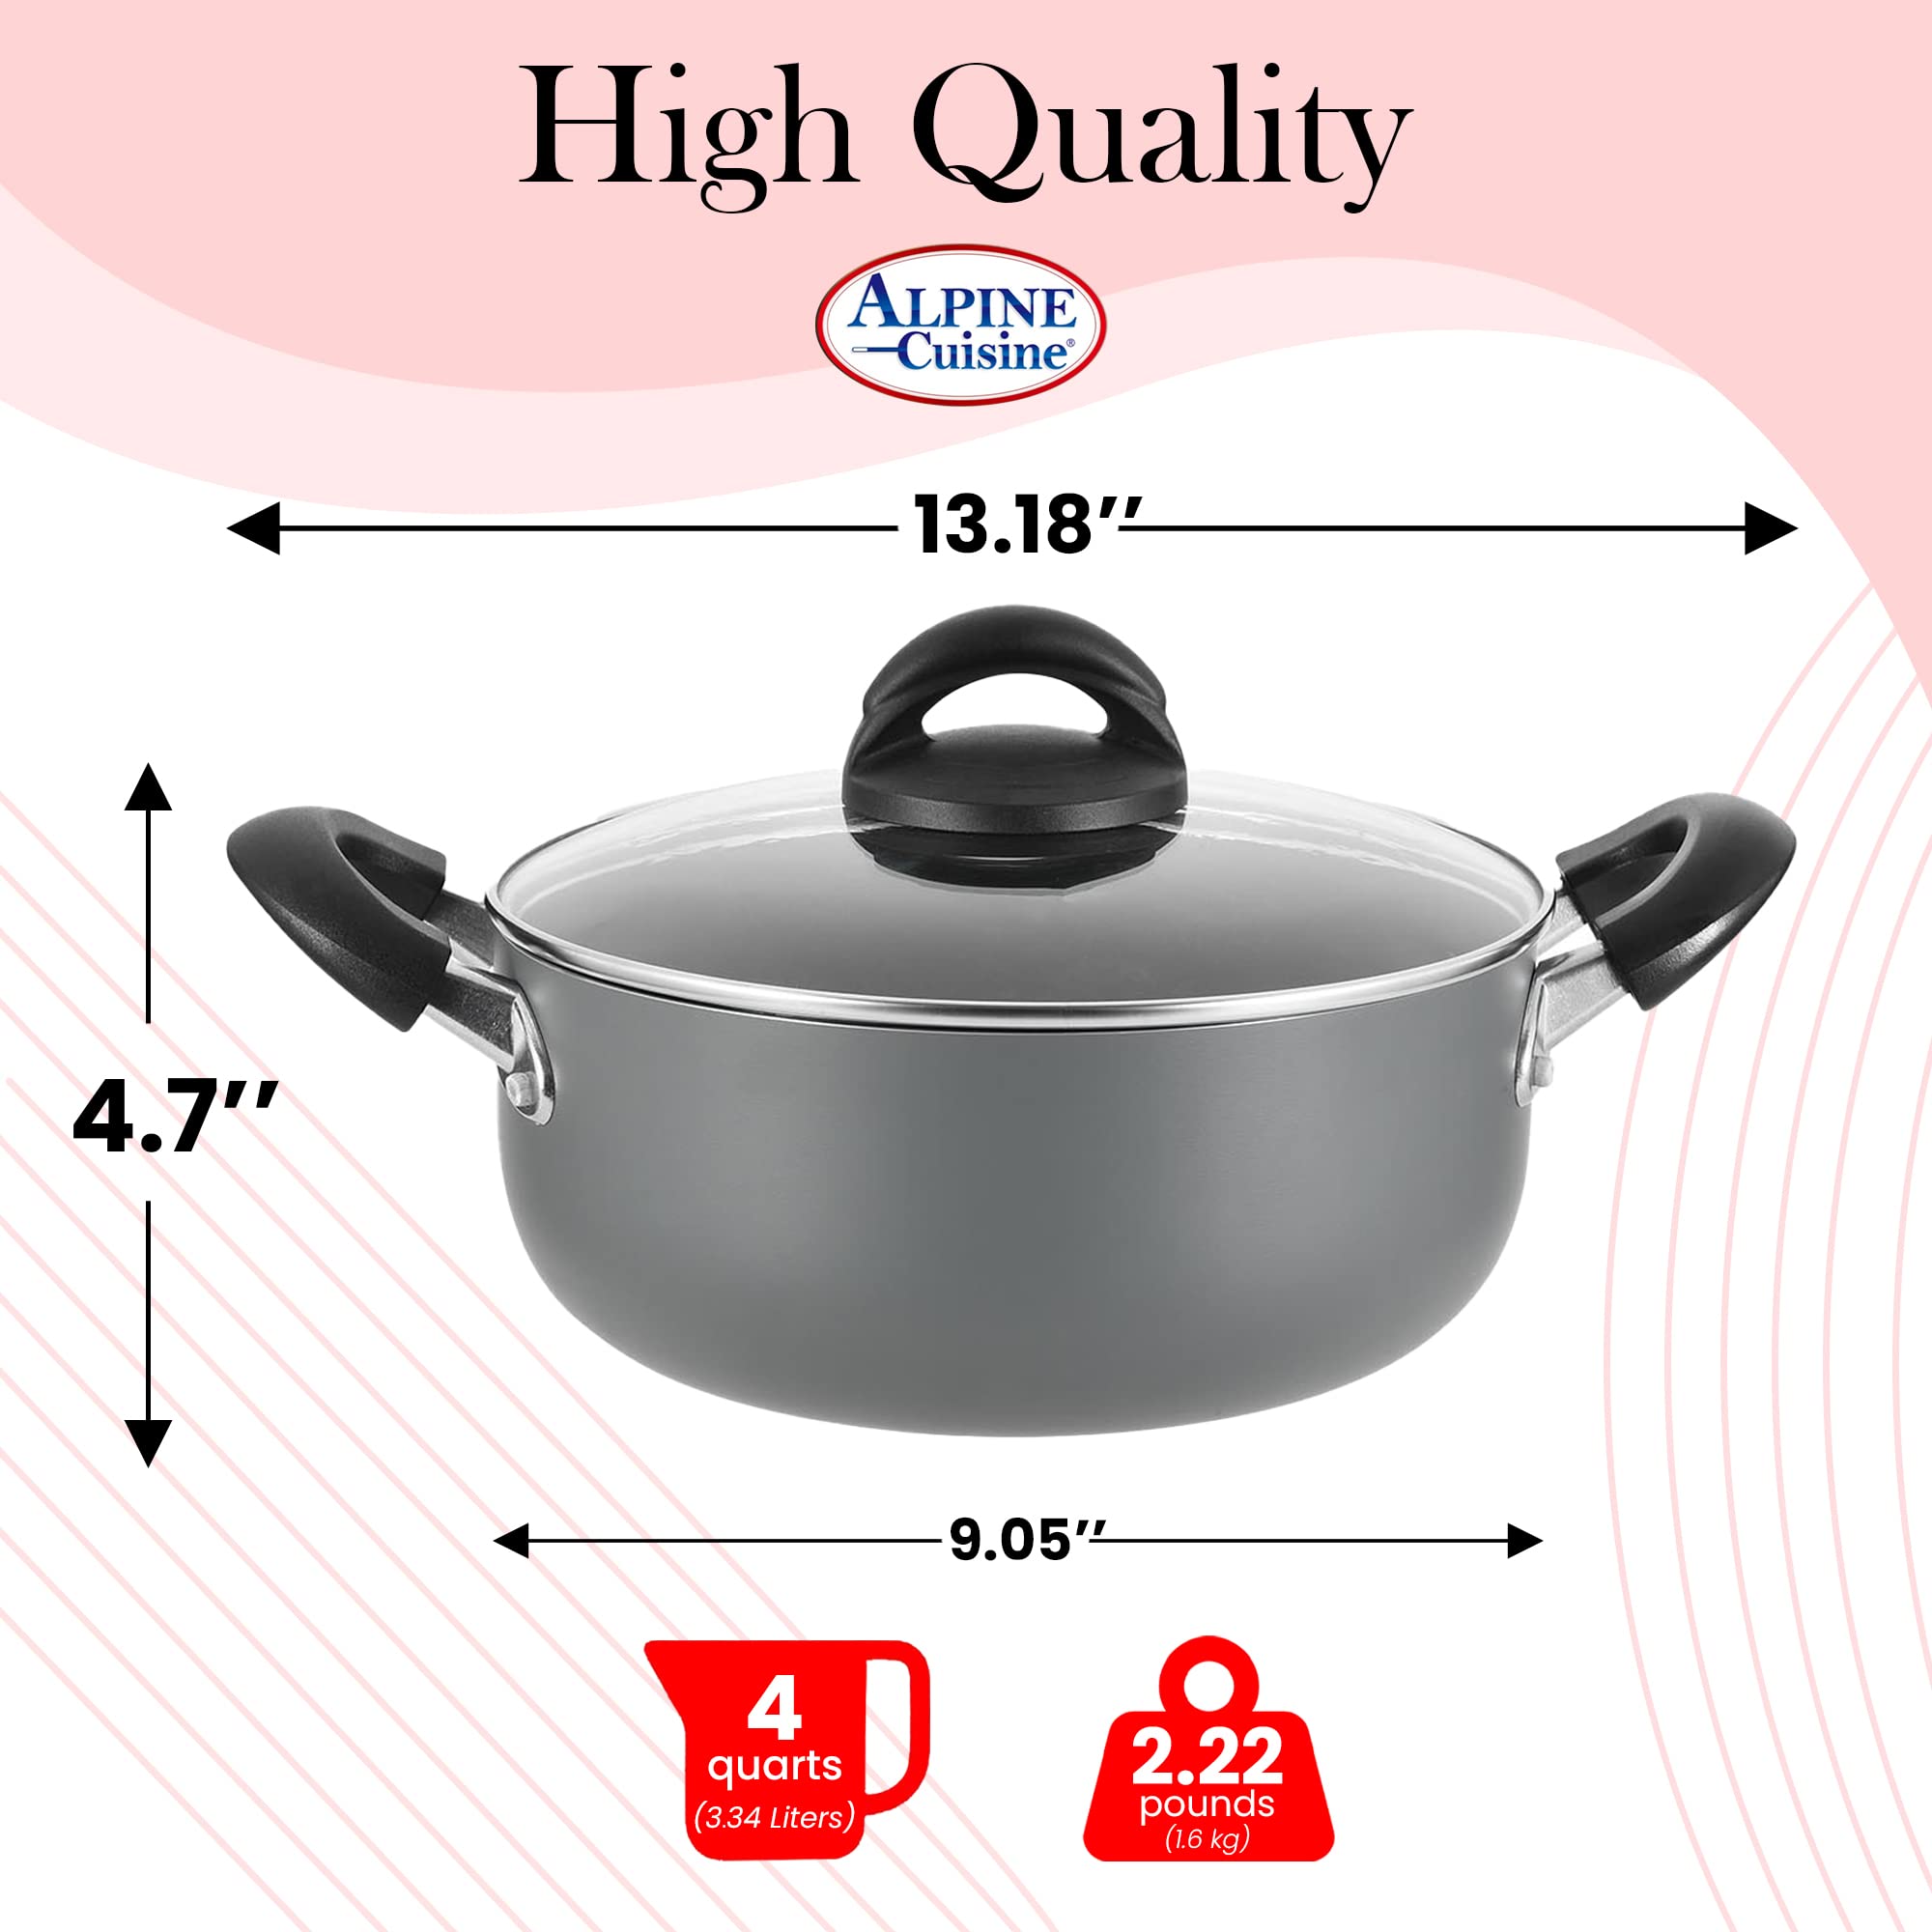 Alpine Cuisine Aluminum Nonstick Coating Dutch oven 4Qt Pot with Lid & Bakelite Handle, Suitable for Bread Baking & Roasting, Ideal for Family, Durable and Evenly Heated, Dishwasher Safe - Gray